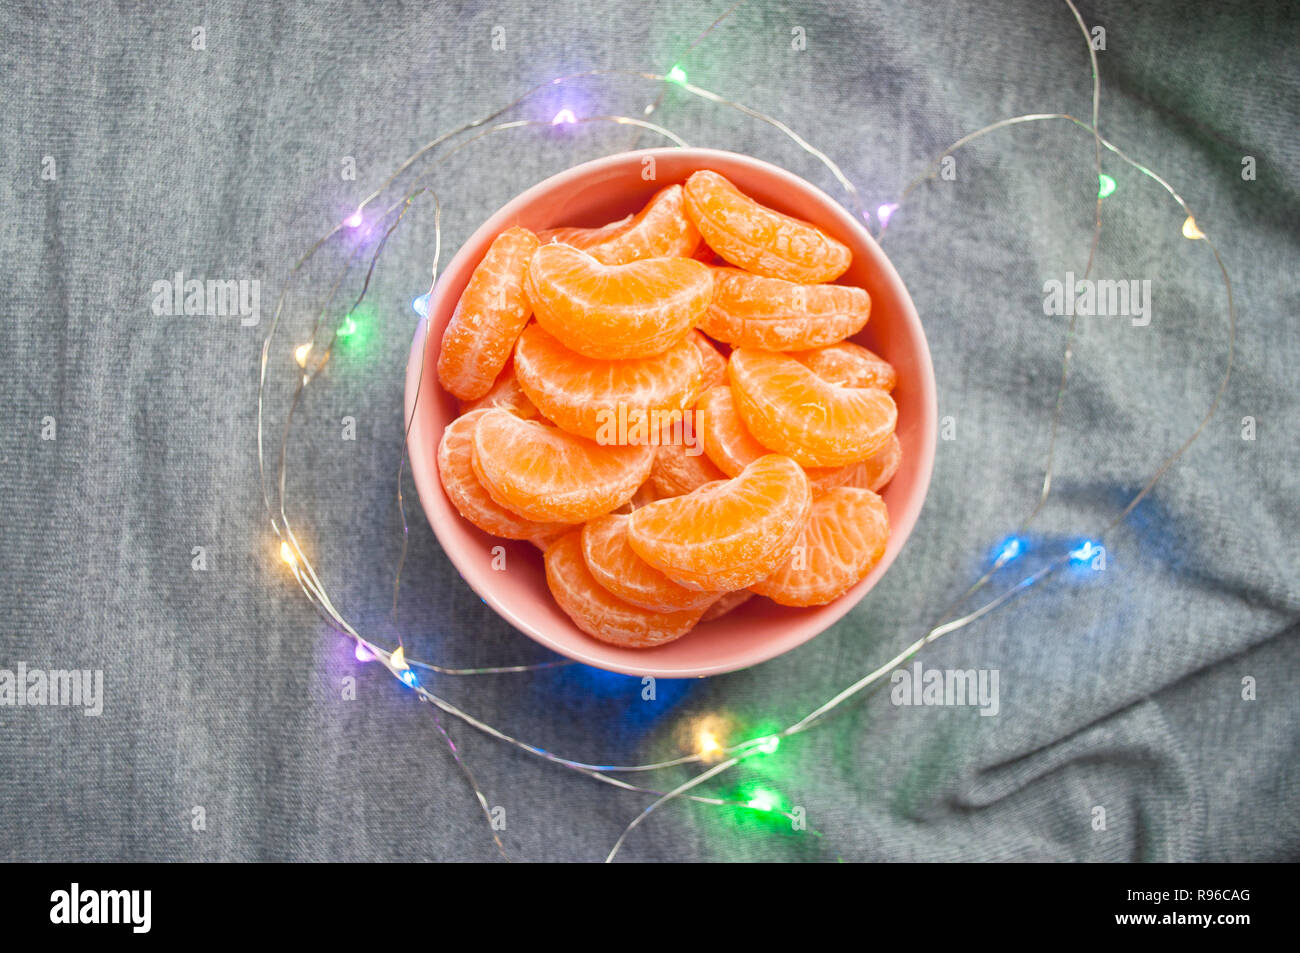 Flat lay of pink bowl full of peeled sweet tangerines on grey background with garland lights. Stock Photo